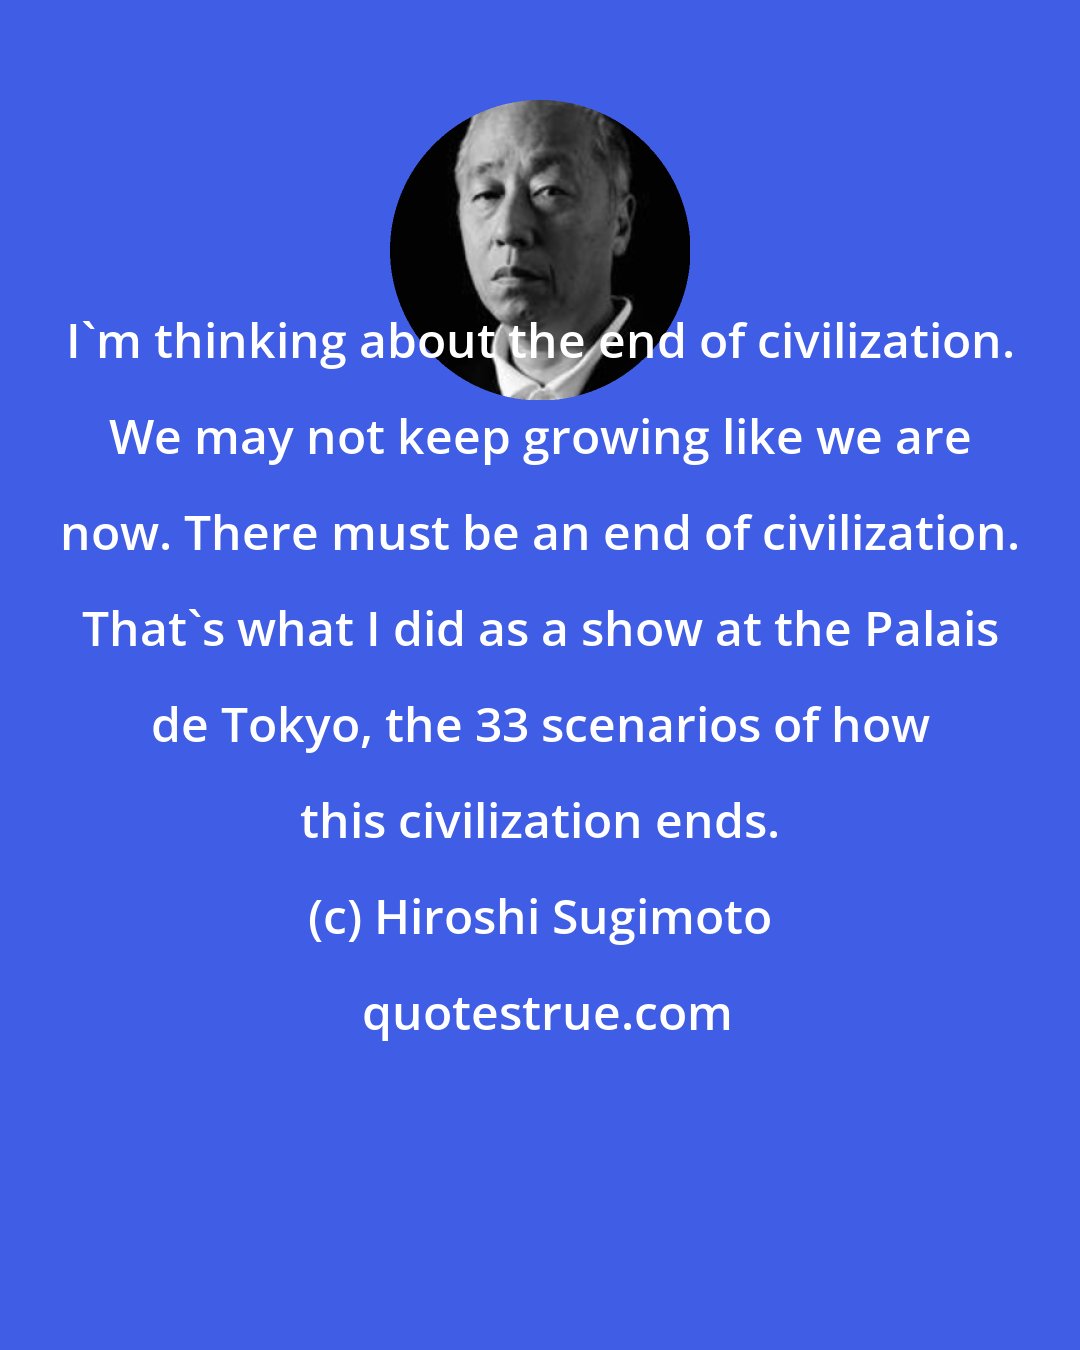 Hiroshi Sugimoto: I'm thinking about the end of civilization. We may not keep growing like we are now. There must be an end of civilization. That's what I did as a show at the Palais de Tokyo, the 33 scenarios of how this civilization ends.